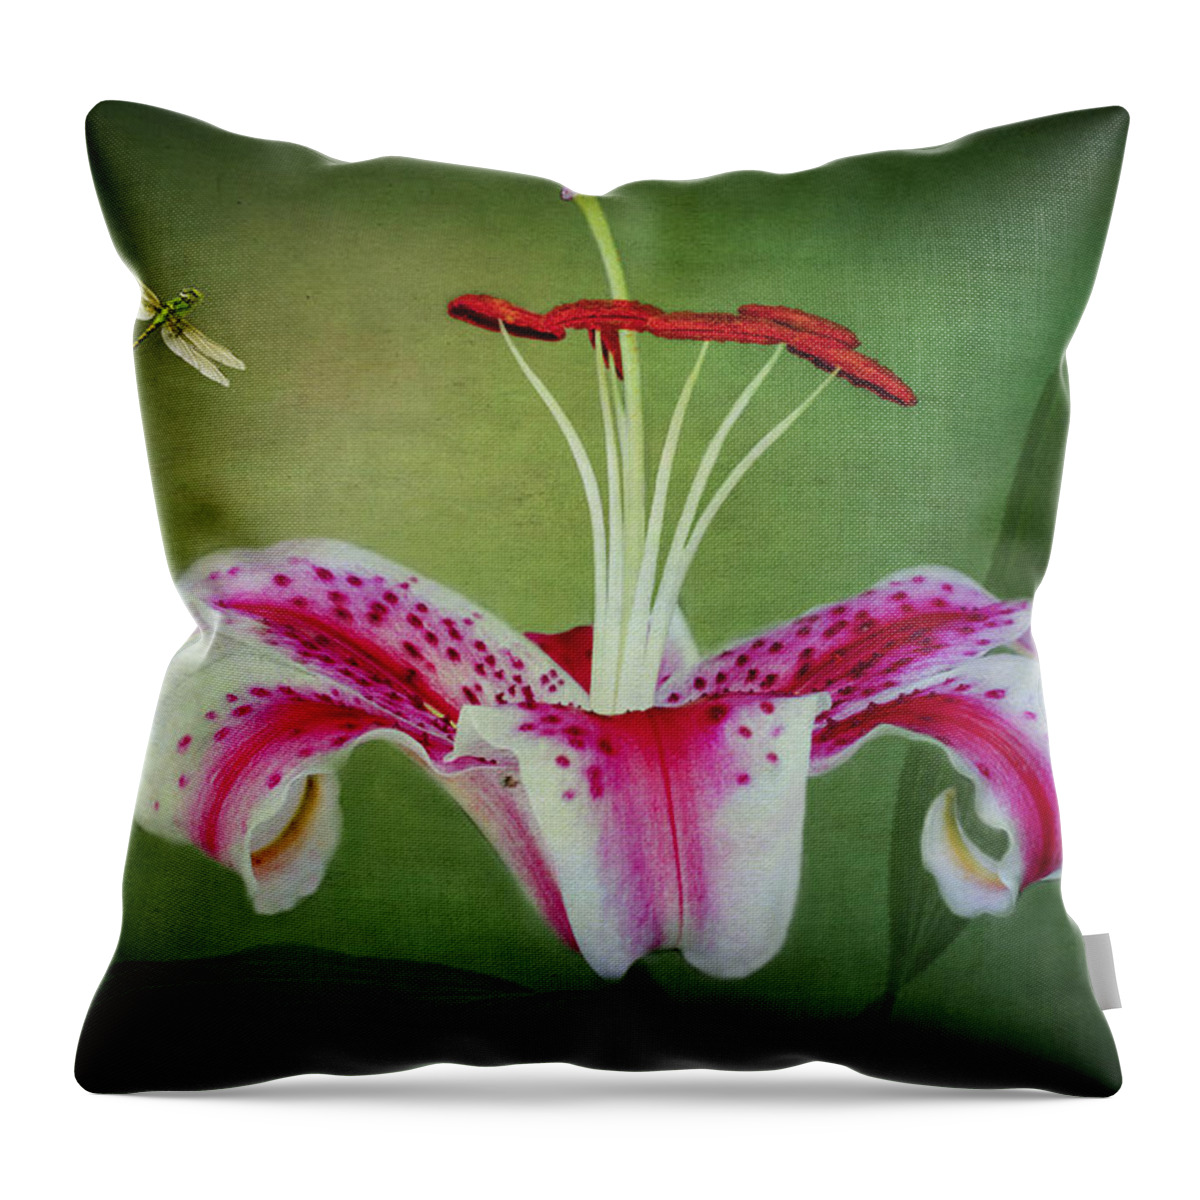 Stargazer Lilies Throw Pillow featuring the photograph In Love by Marina Kojukhova